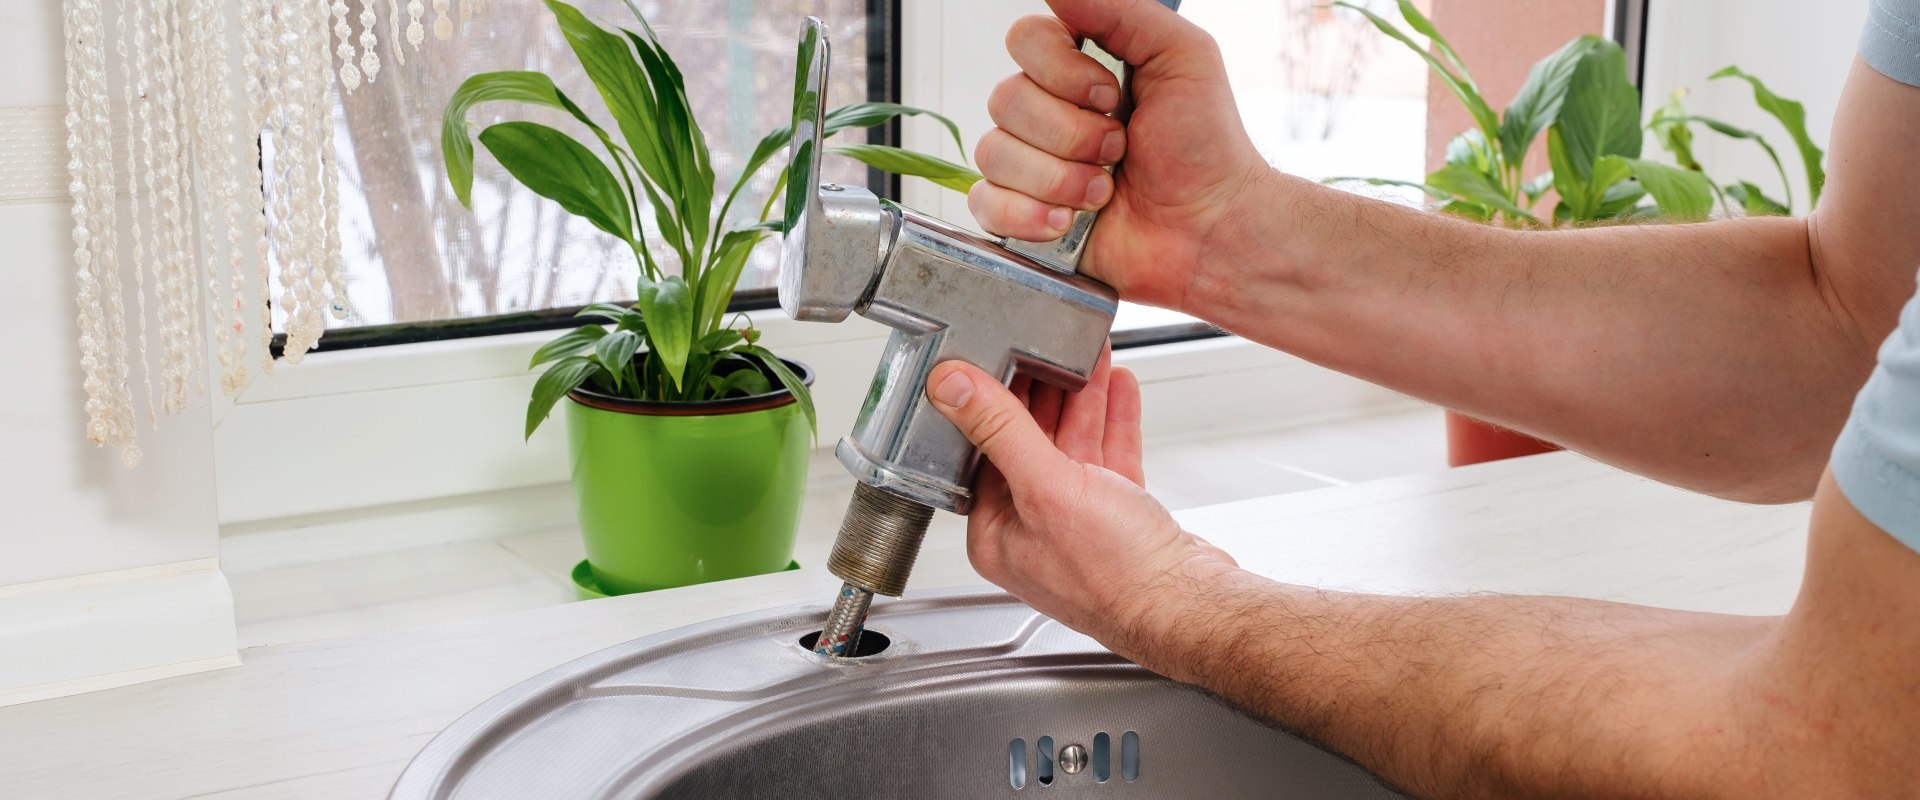 Installing a New Faucet: A Step-by-Step Guide